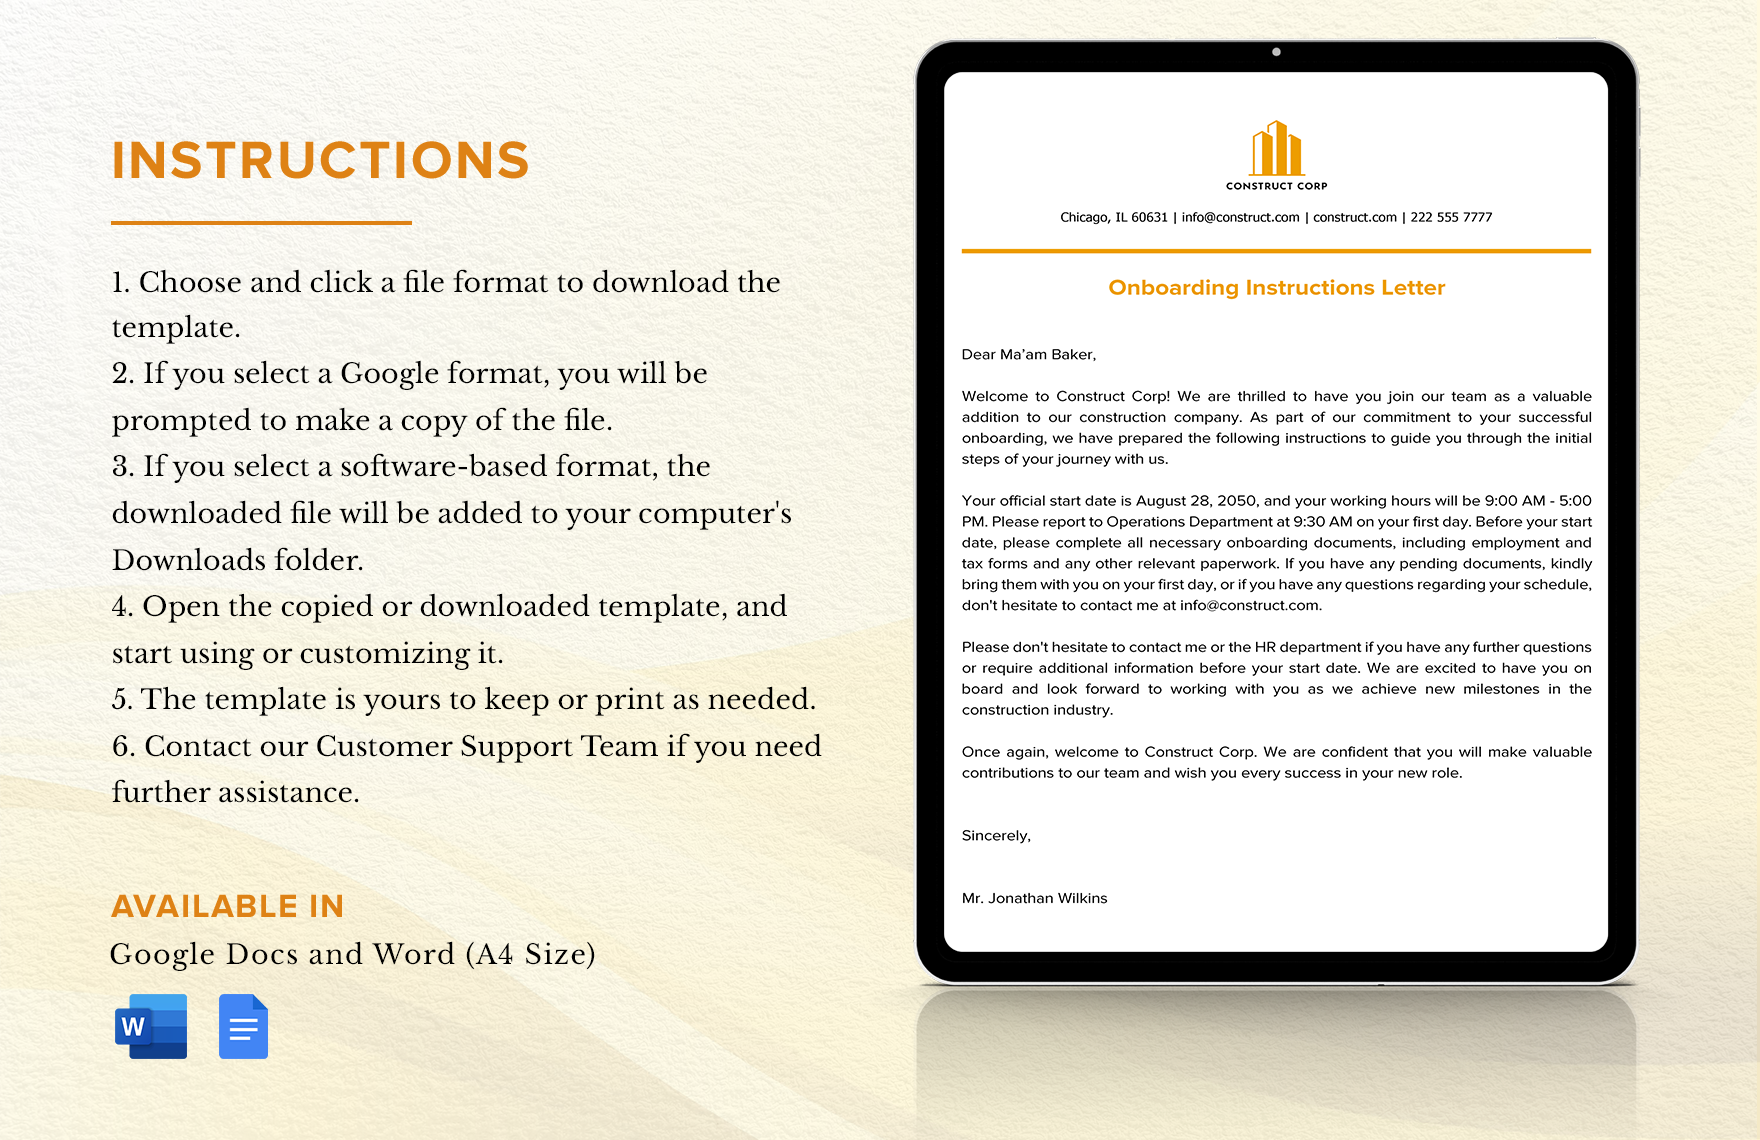 Onboarding Instructions Letter Template